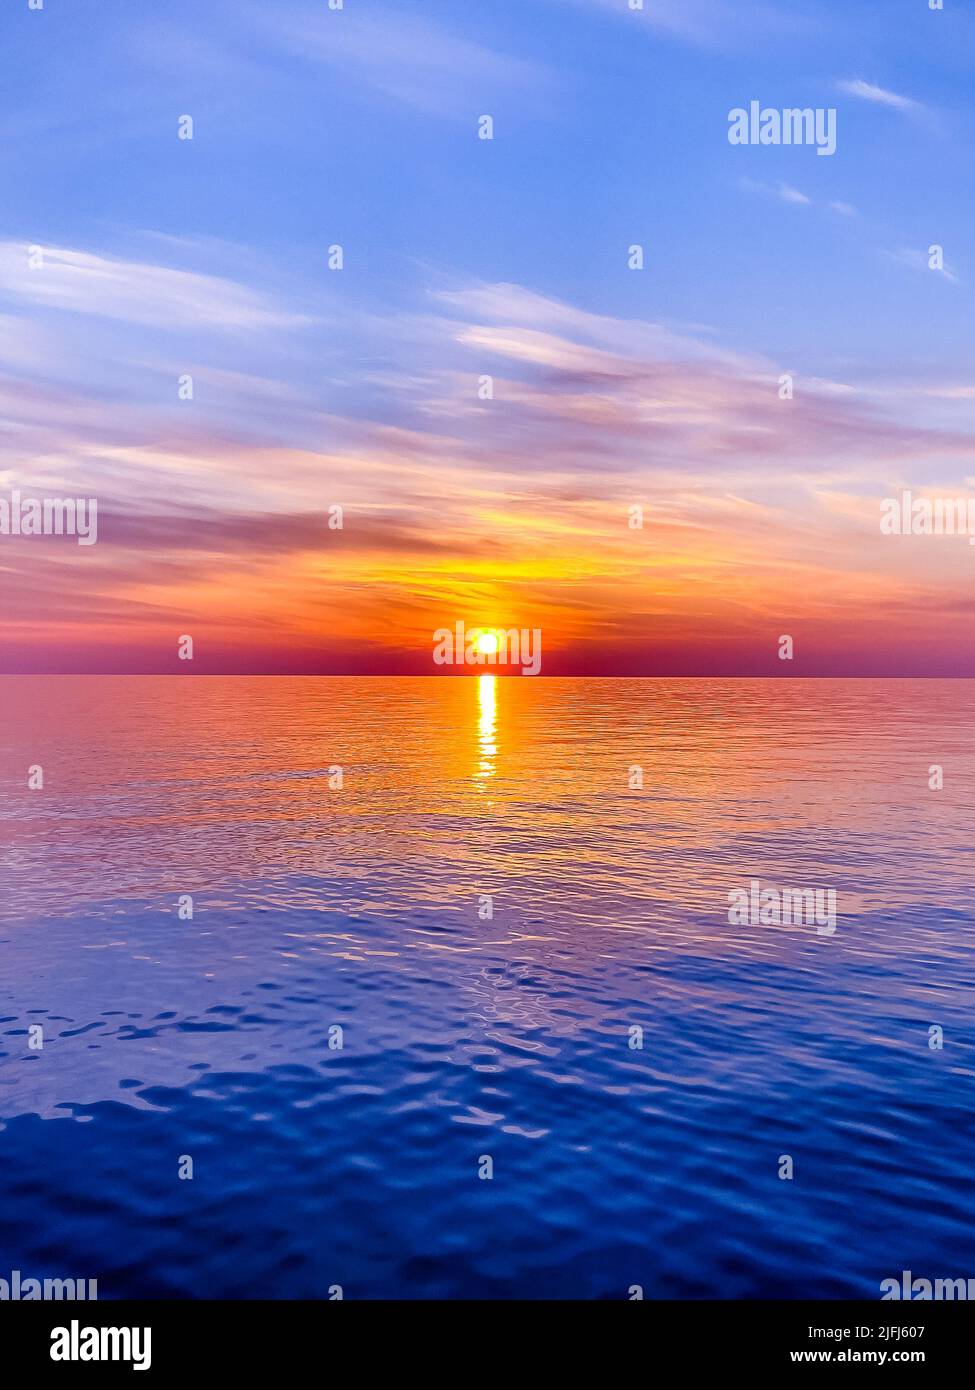 Calm sea with sunset sky In Sochi Stock Photo